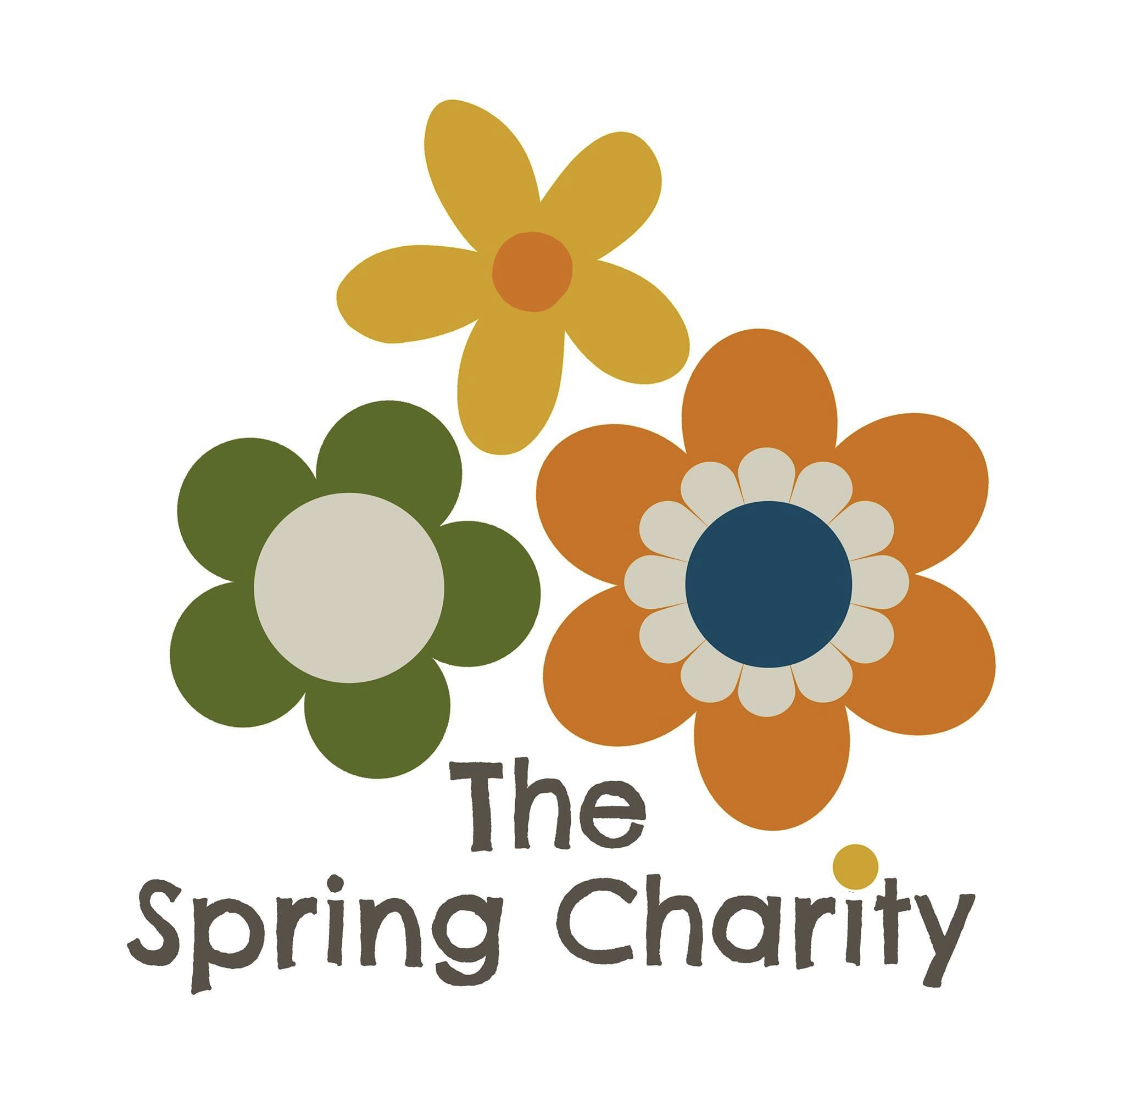 The Spring Charity's logo